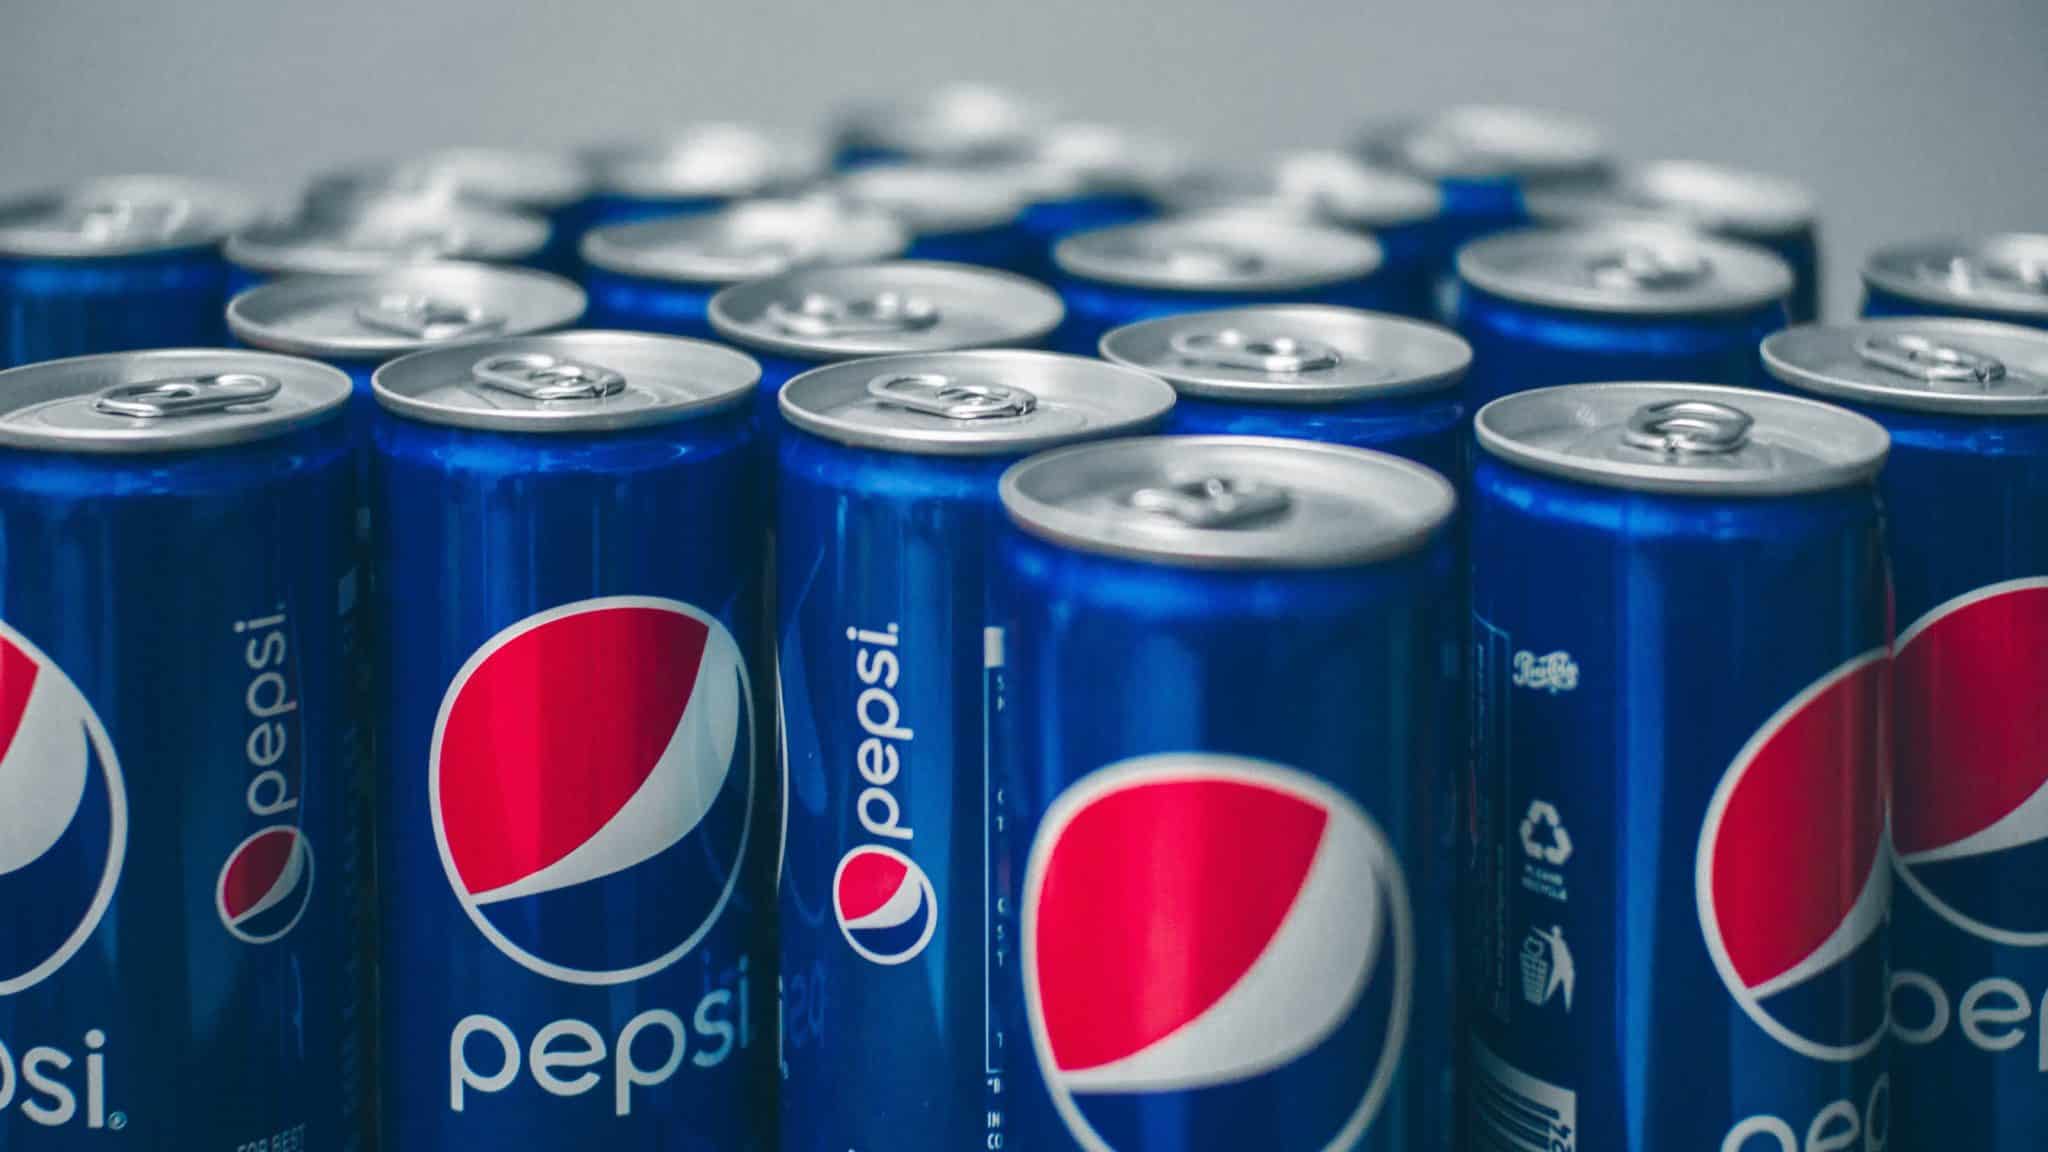 PepsiCo Conducts a Blockchain-Based Trial Bringing Up a Whooping 28% Boost in Supply Chain Efficiency